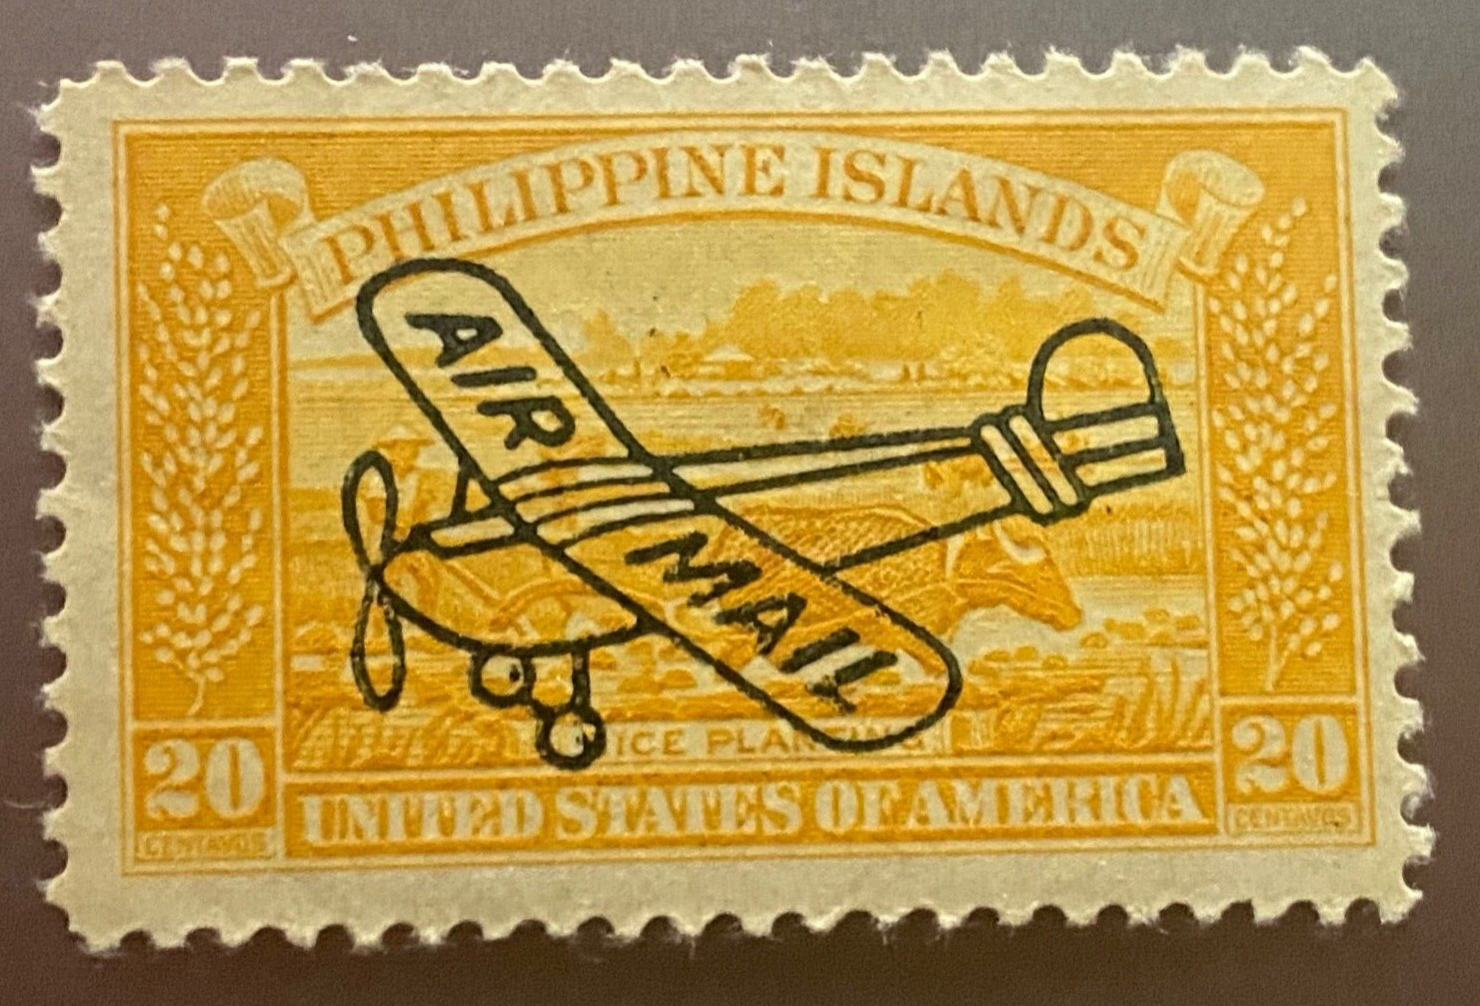 1933 20c Philippine Islands Airmail, yellow, unwatermarked, perf 11 MH OG. VF